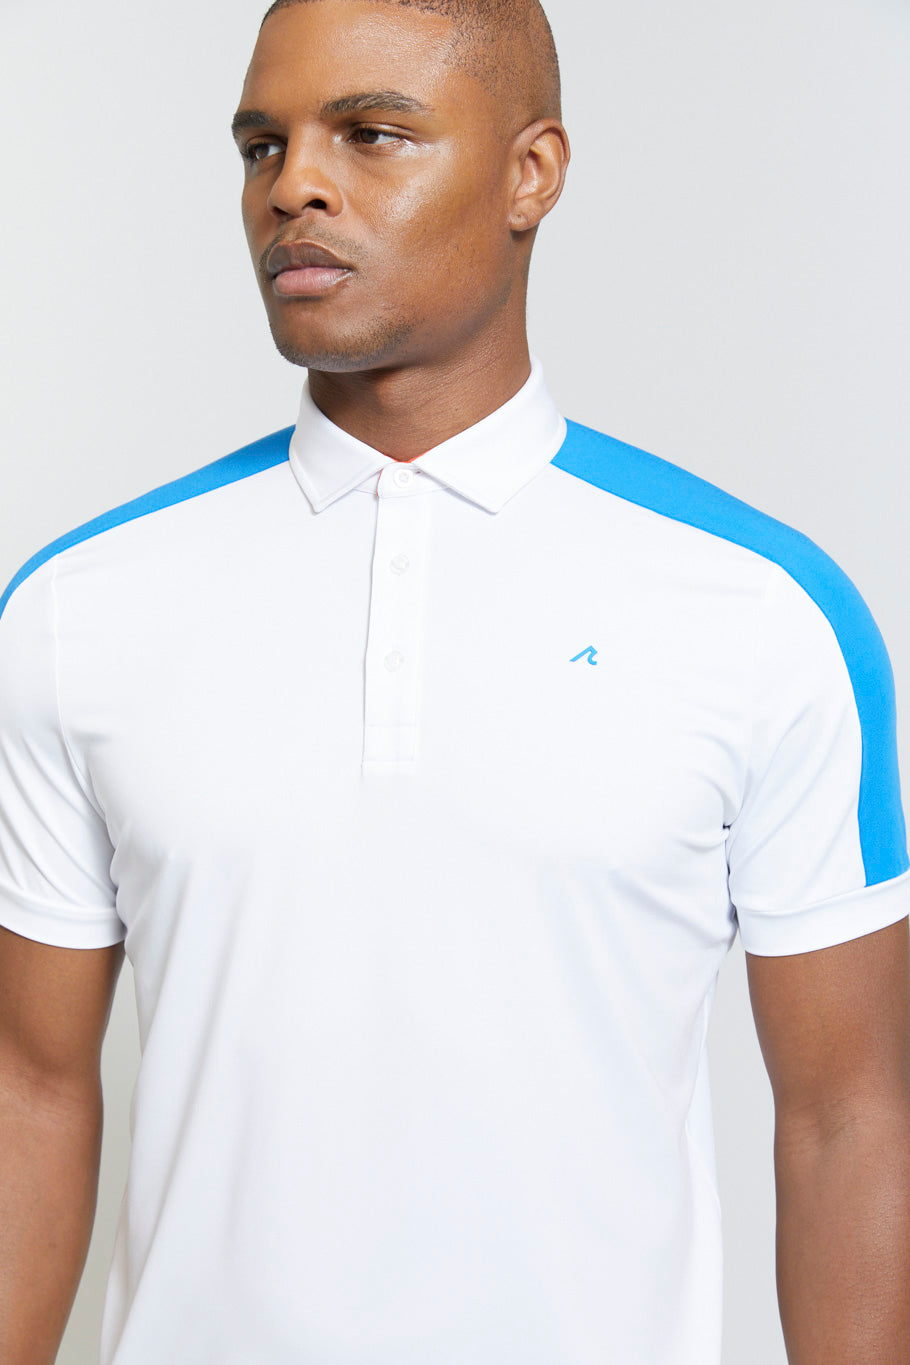 Image of the evans polo in bright white